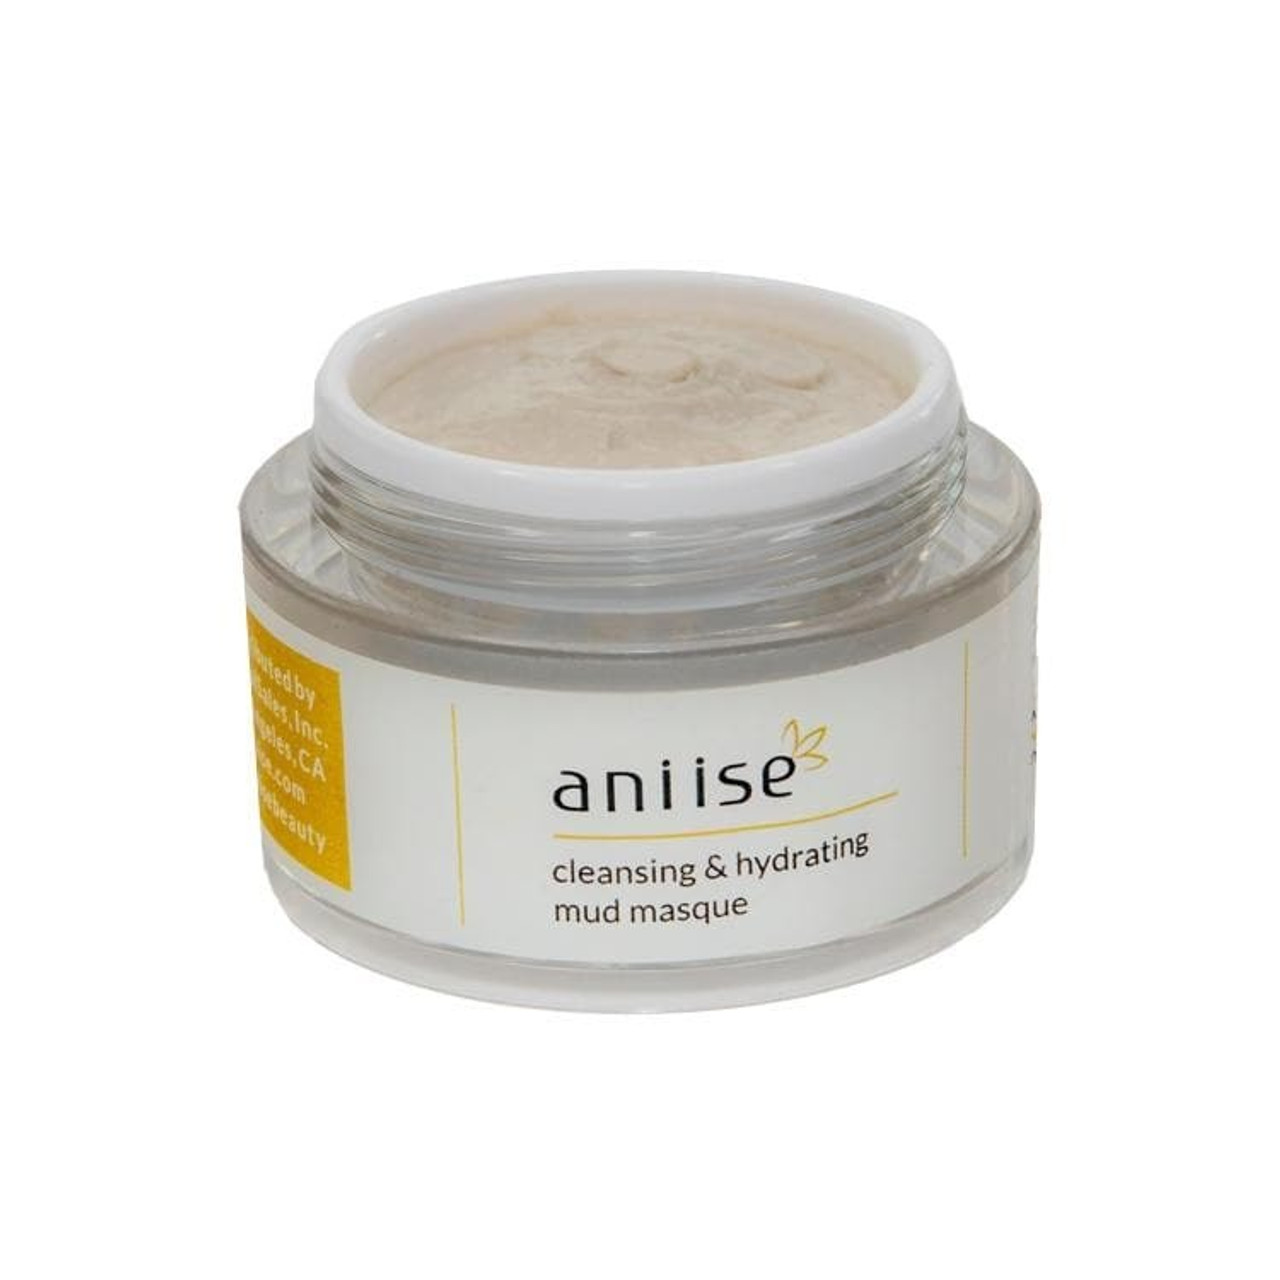 Aniise Skincare Collection for Your 30s